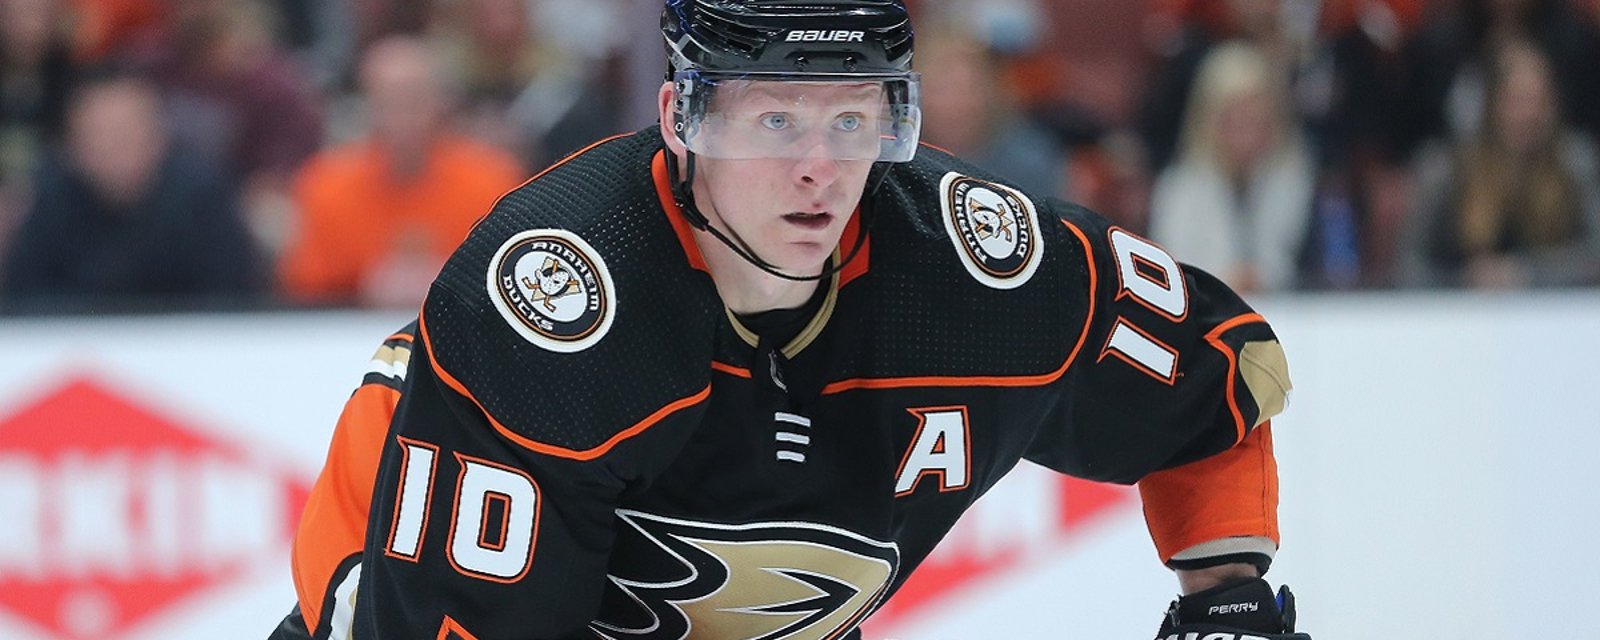 Rumor: Corey Perry is done in Anaheim. 